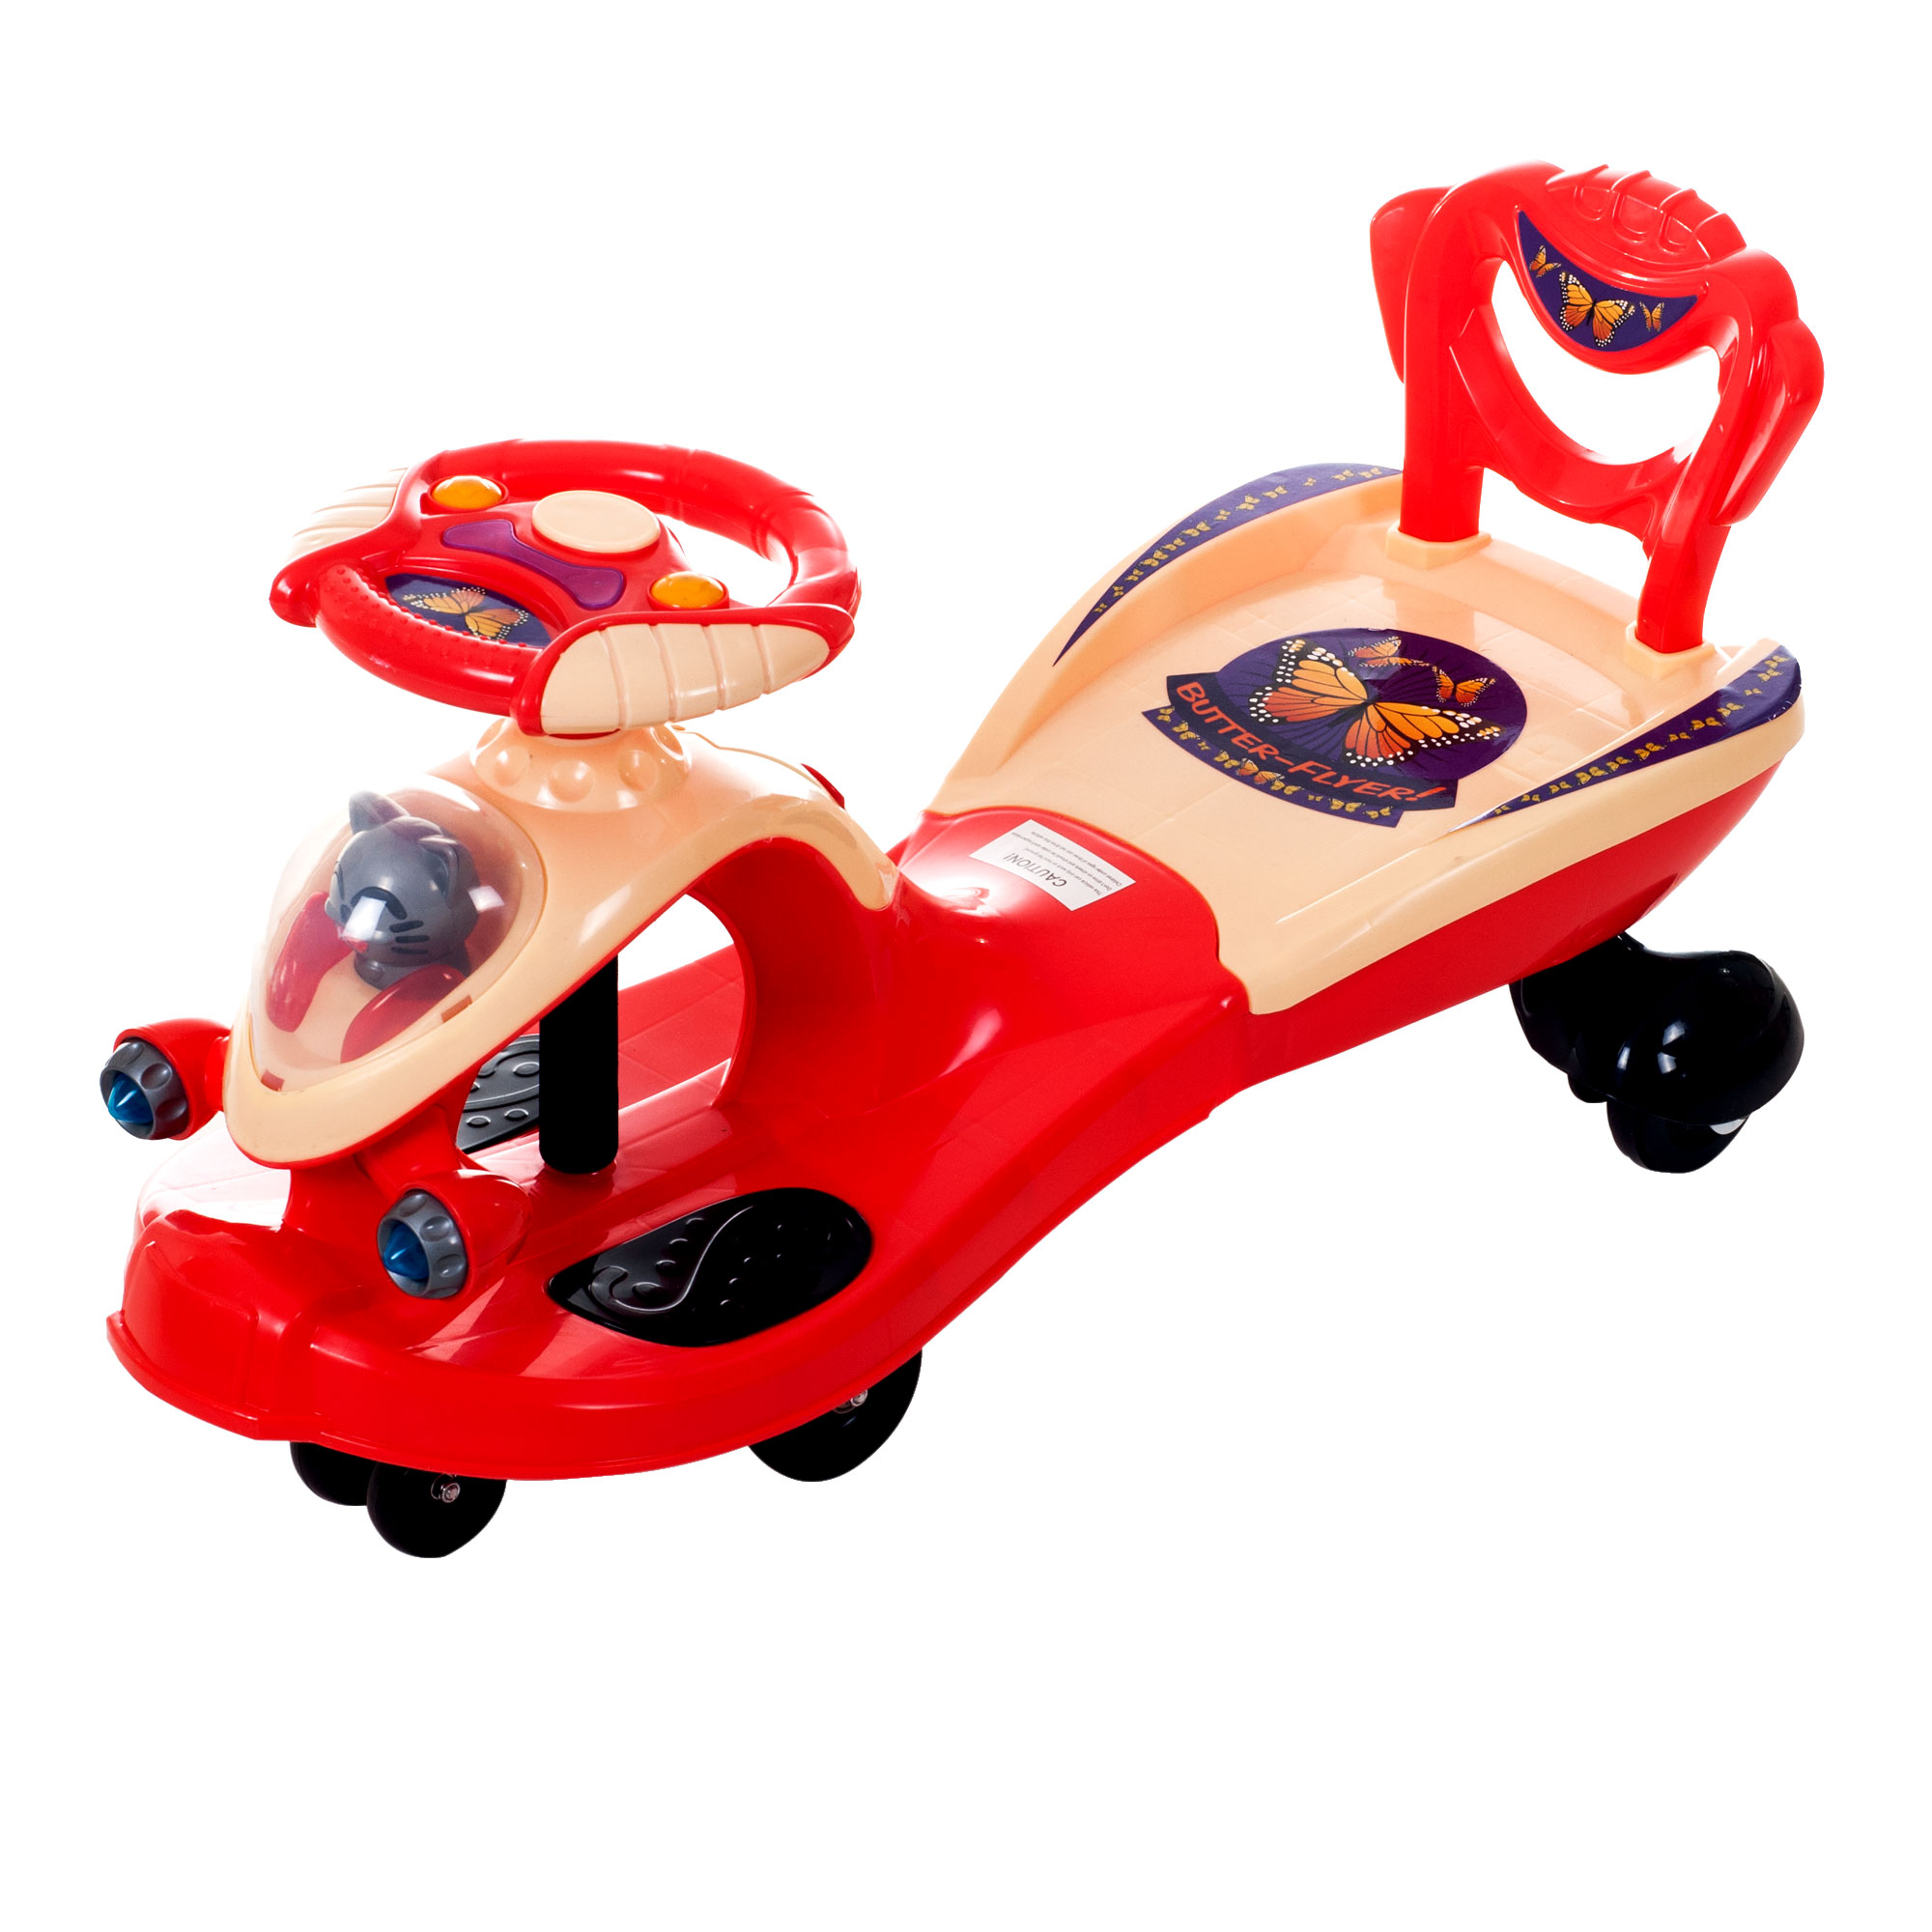 Butter-Flyer Wiggle Ride-on Car with Sound & Light